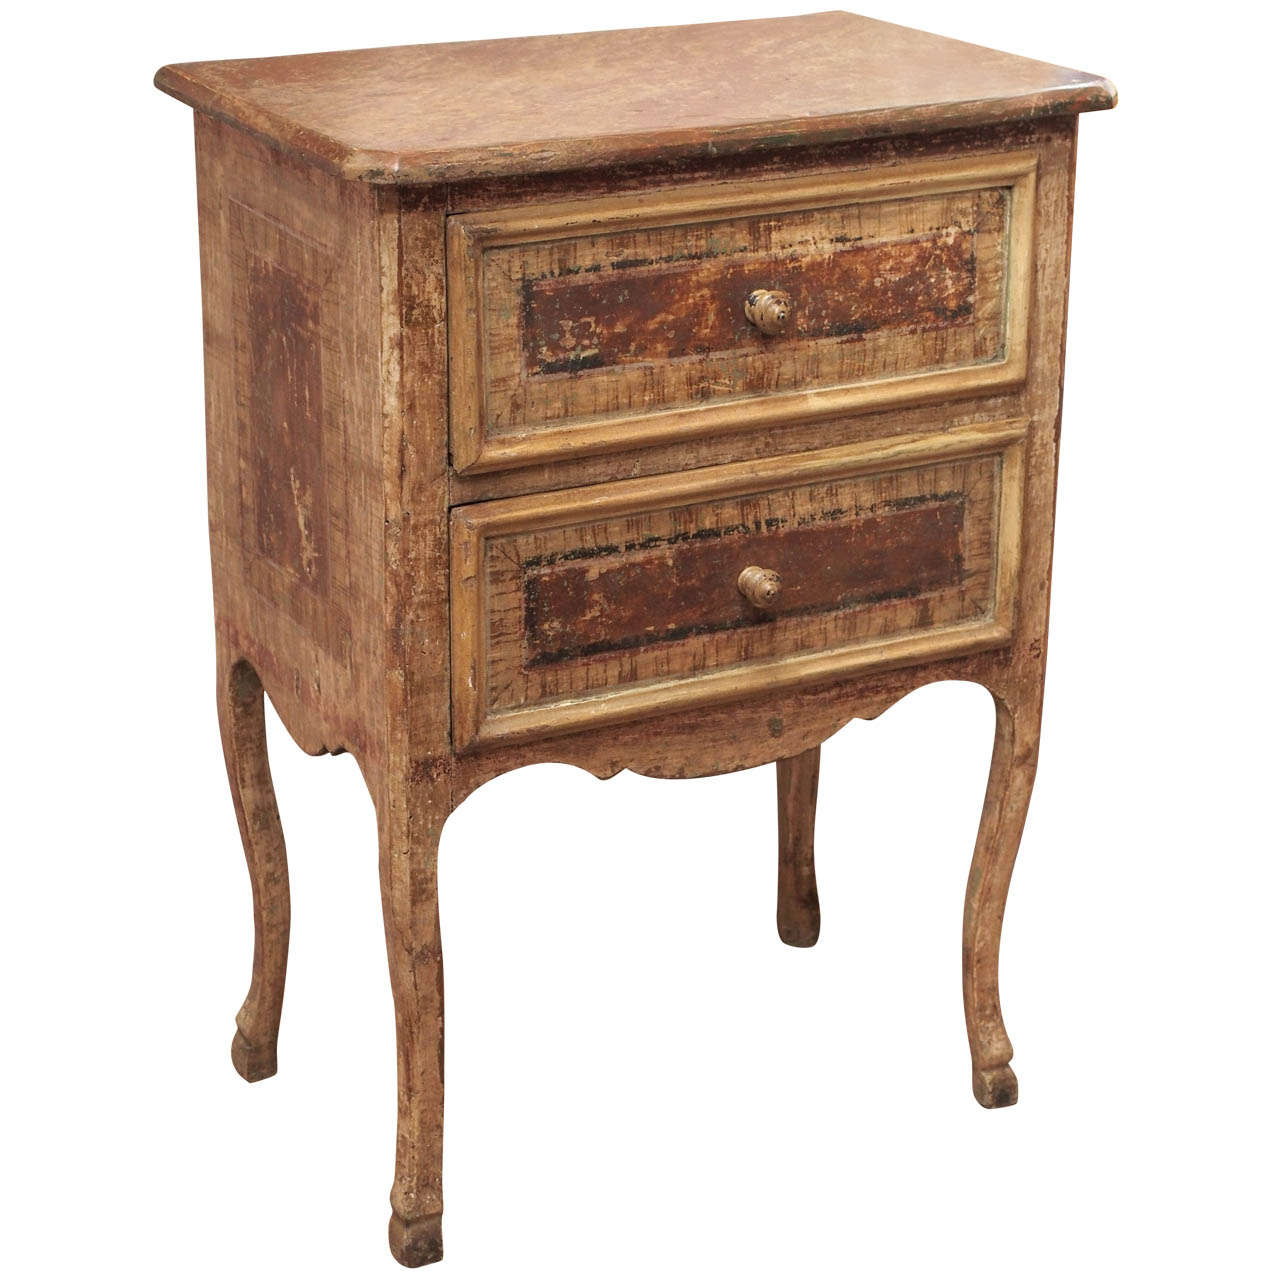 Small Painted Commode with Two Drawers